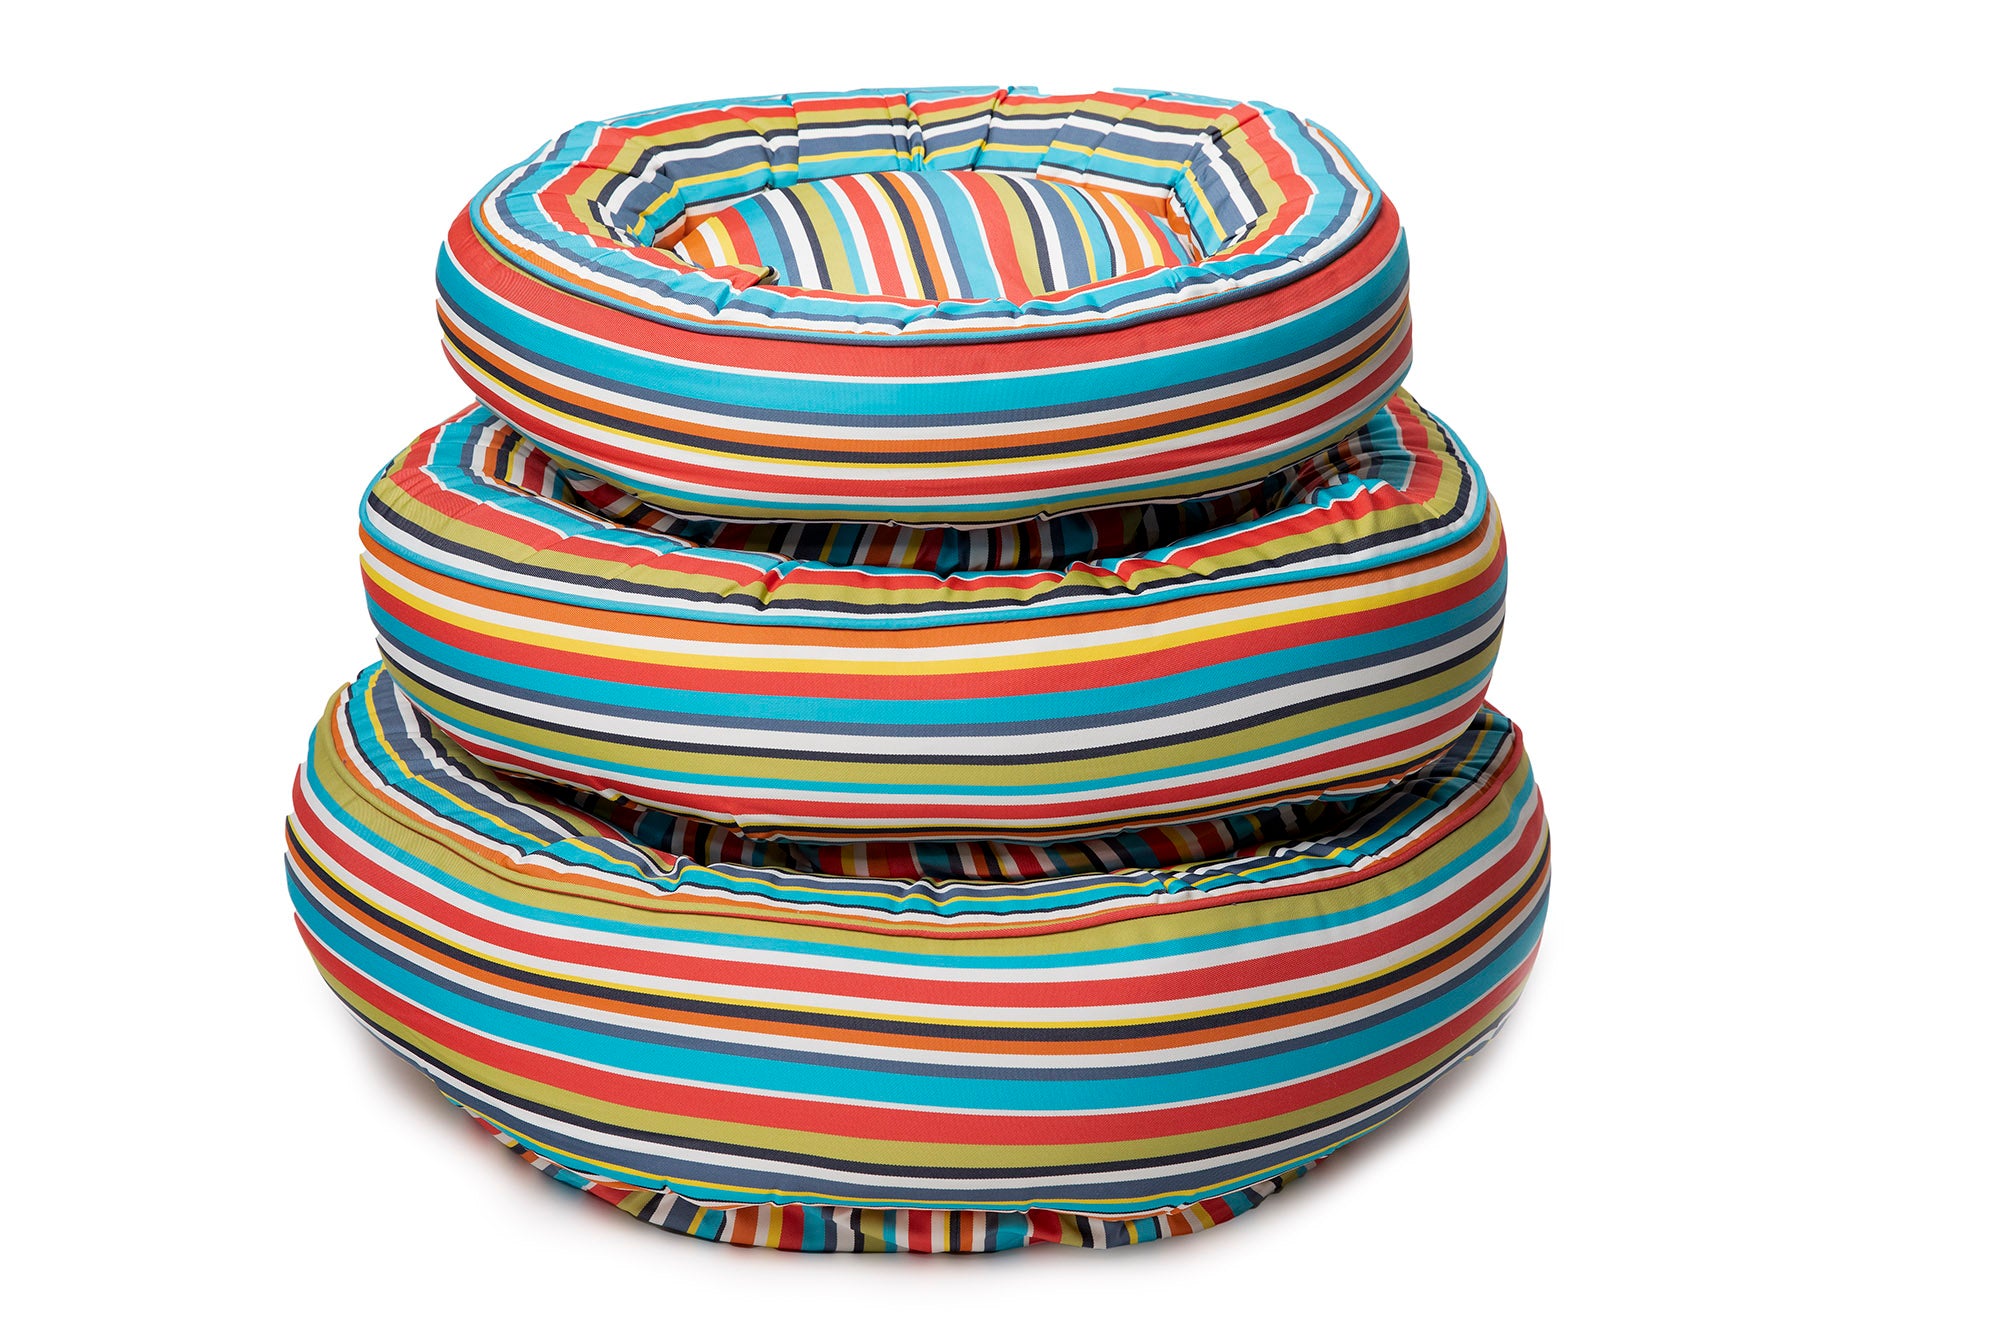 Canine Styles - Cotton Canvas - Reef Stripe - Dog Bed